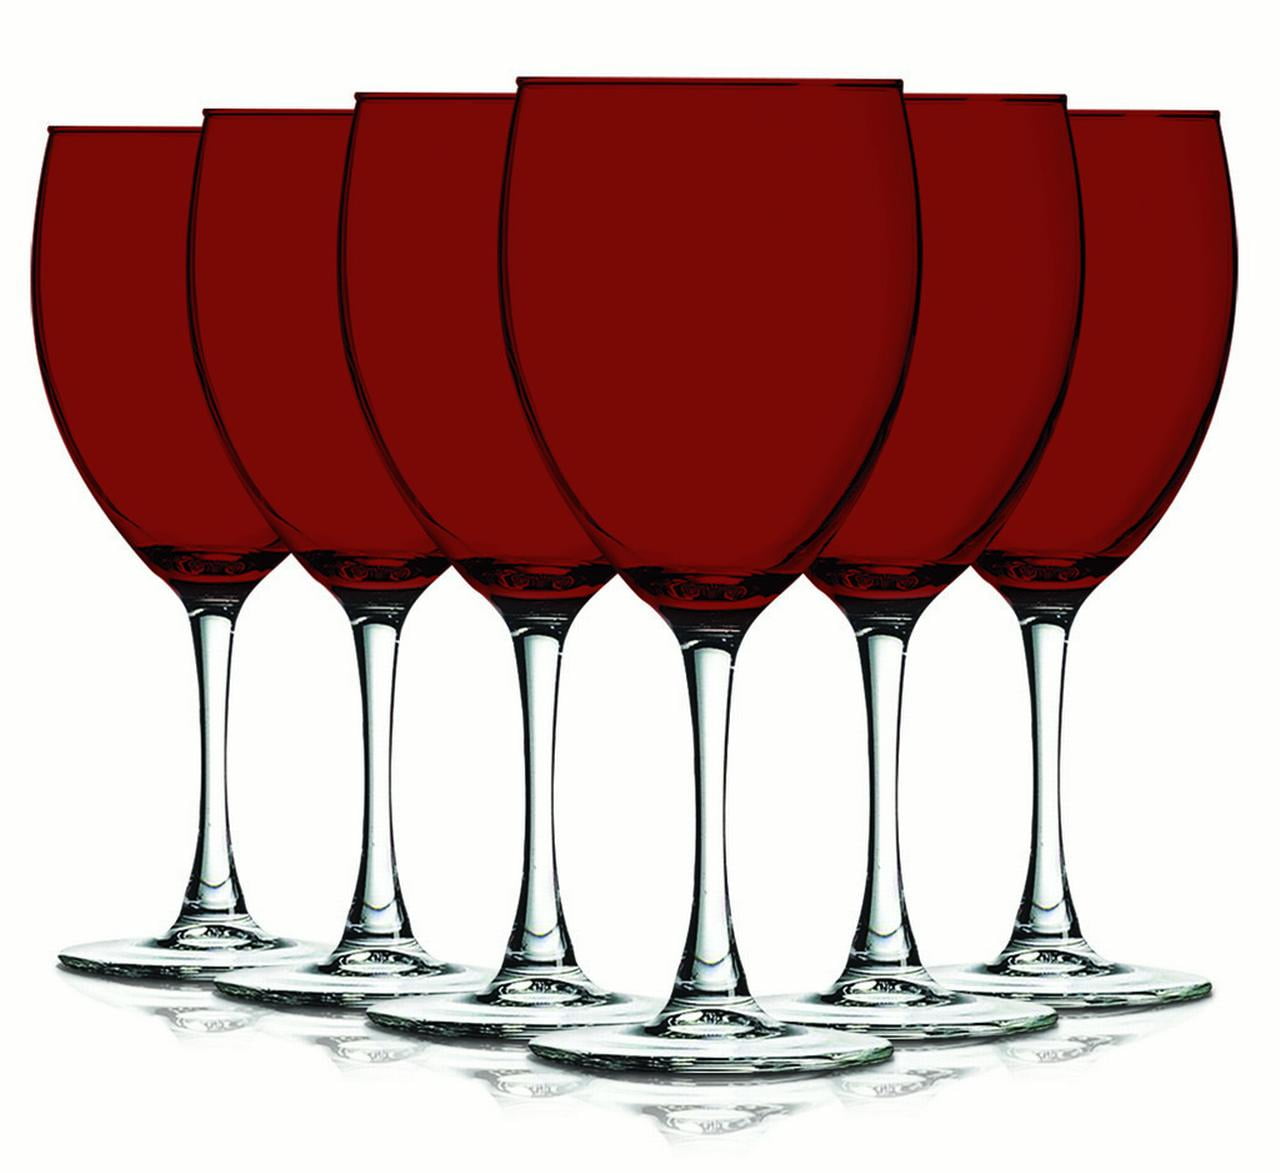 Tabletop King 10 Oz Wine Glasses Stemmed Style Nuance Top Accent Red Set Of 6